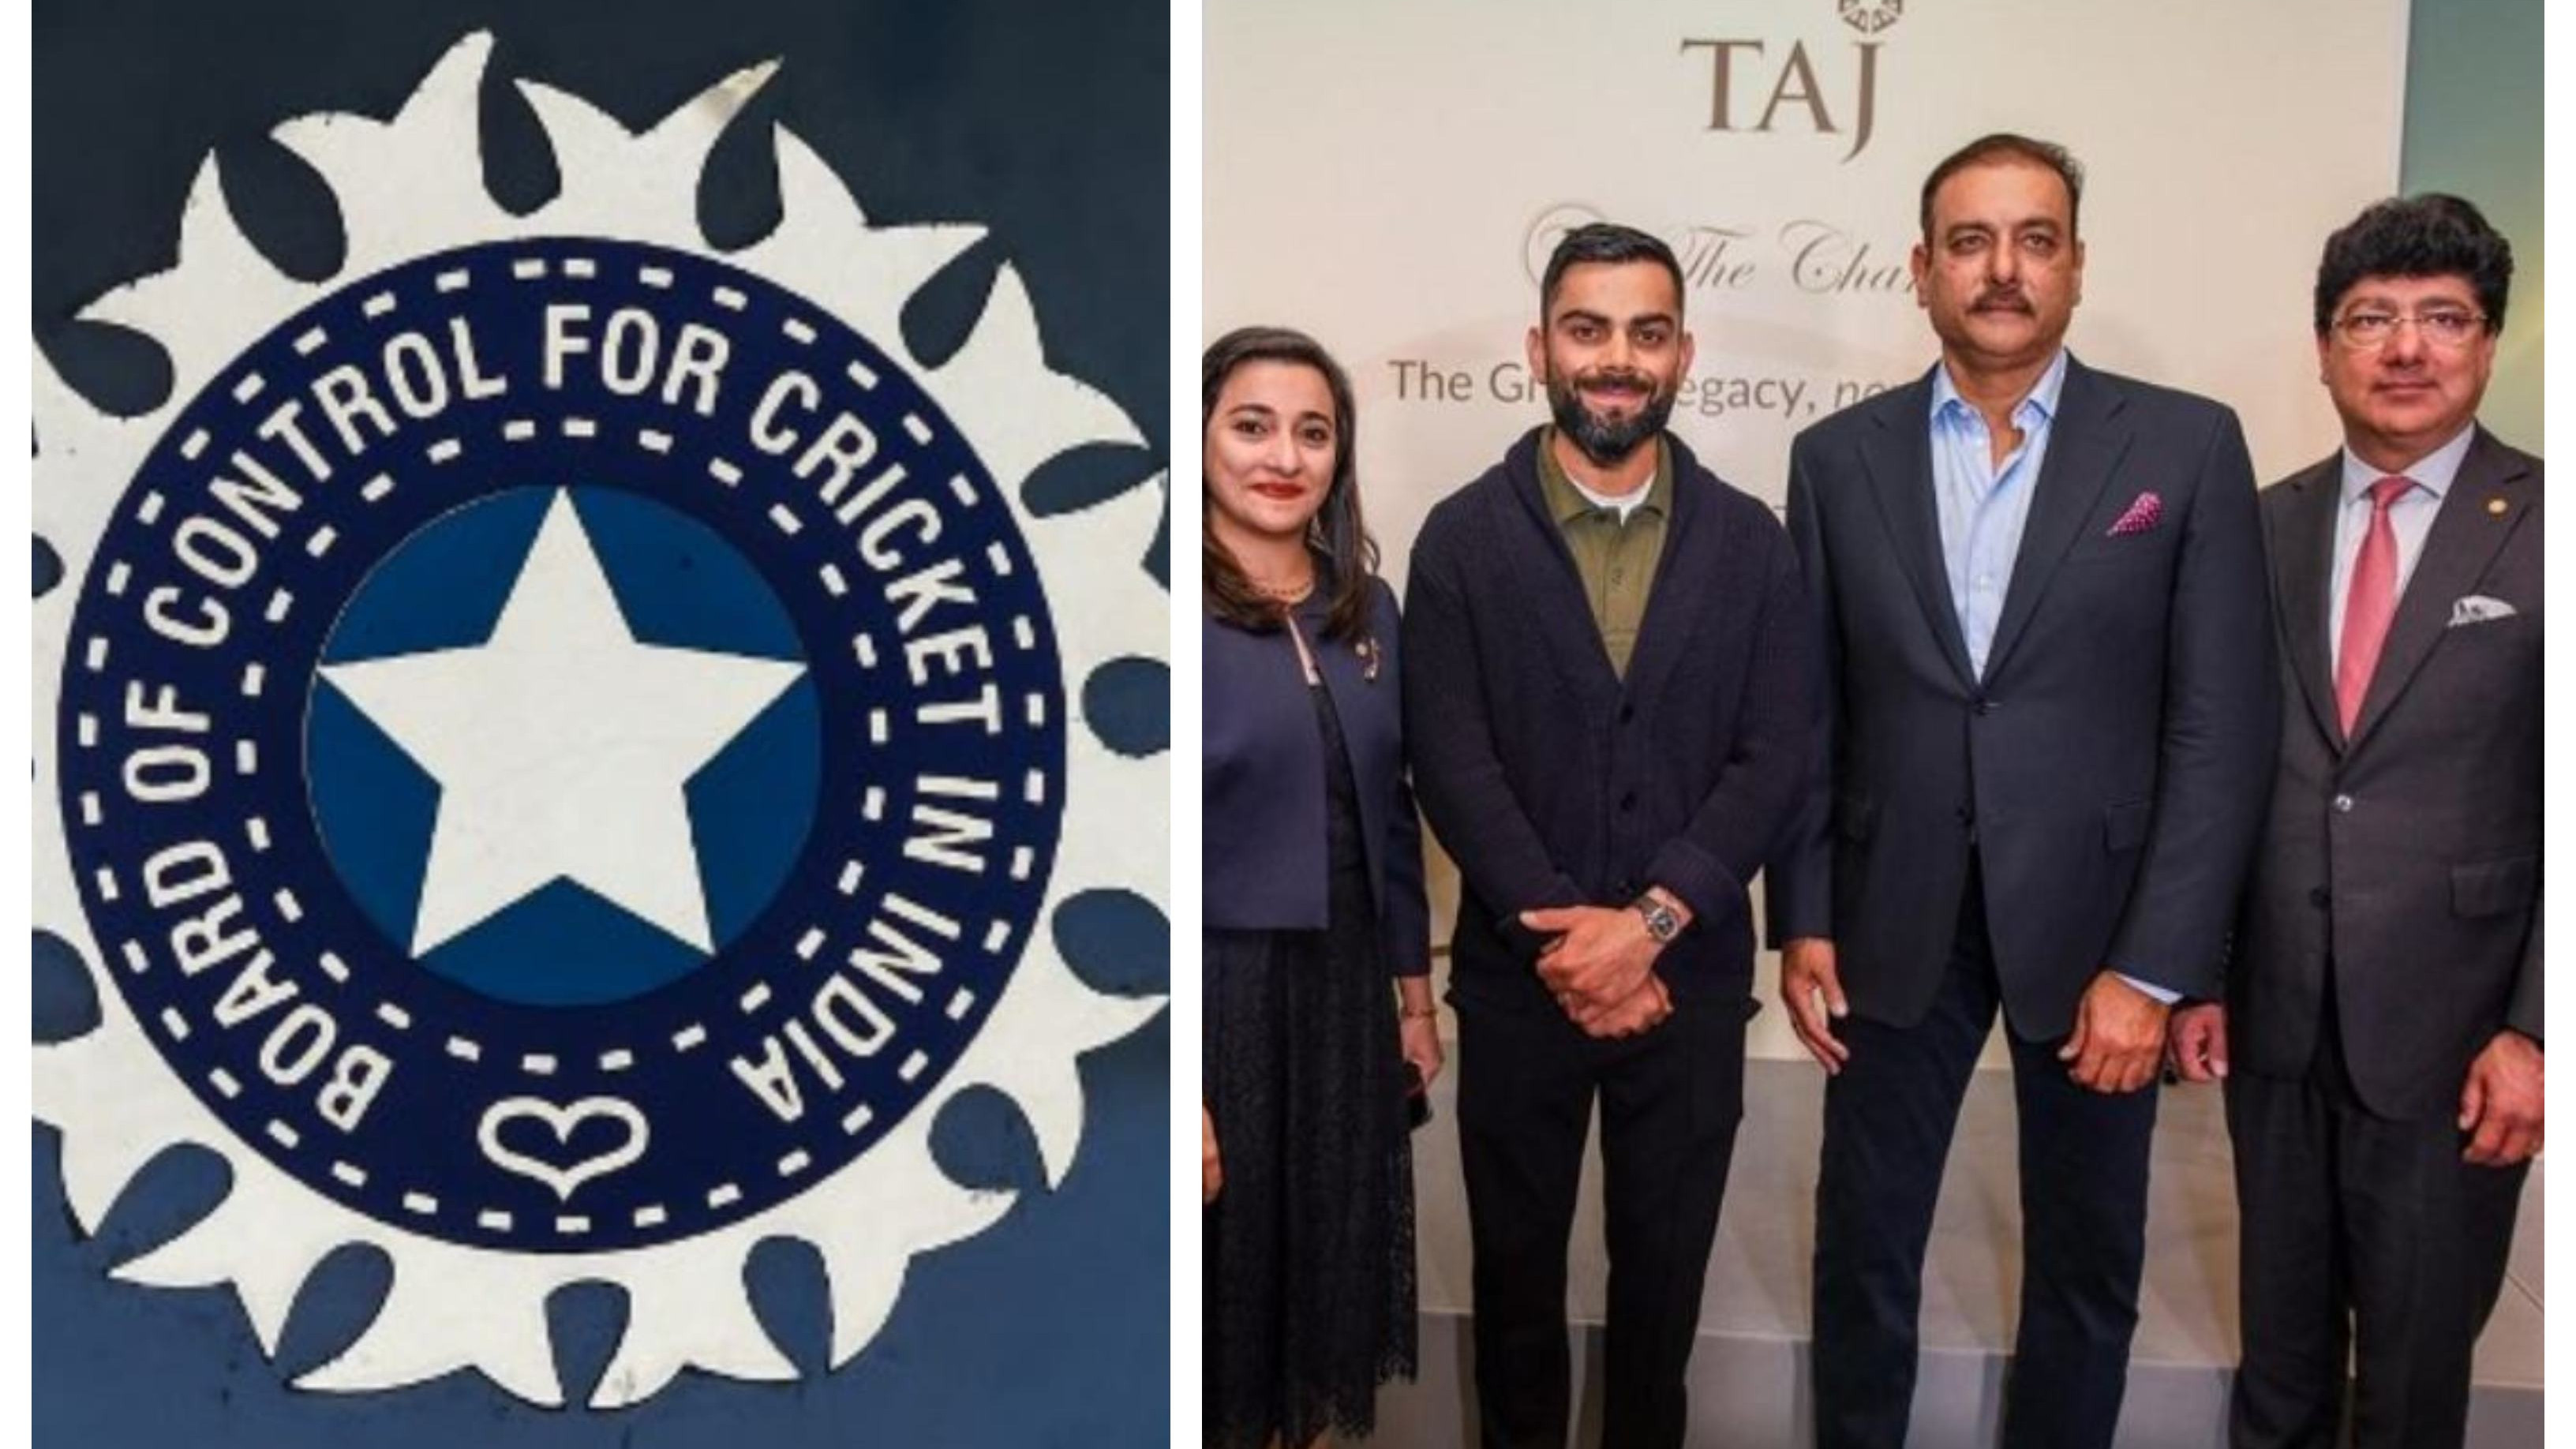 ENG v IND 2021: BCCI not happy as Ravi Shastri, Virat Kohli attend book launch without proper permission – Report